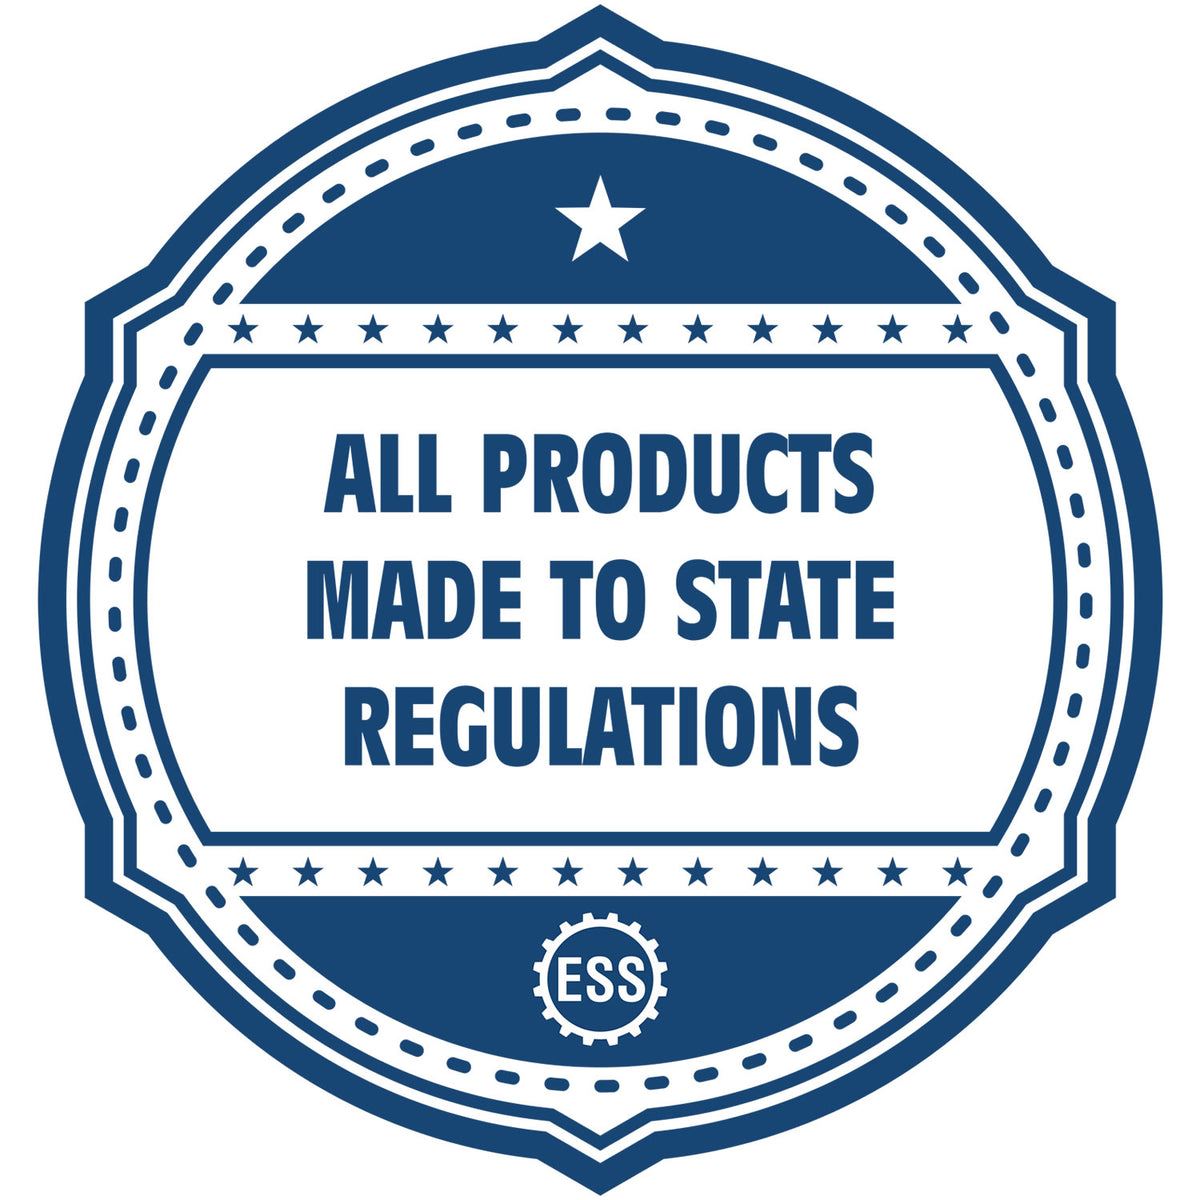 An icon or badge element for the Soft Georgia Professional Engineer Seal showing that this product is made in compliance with state regulations.